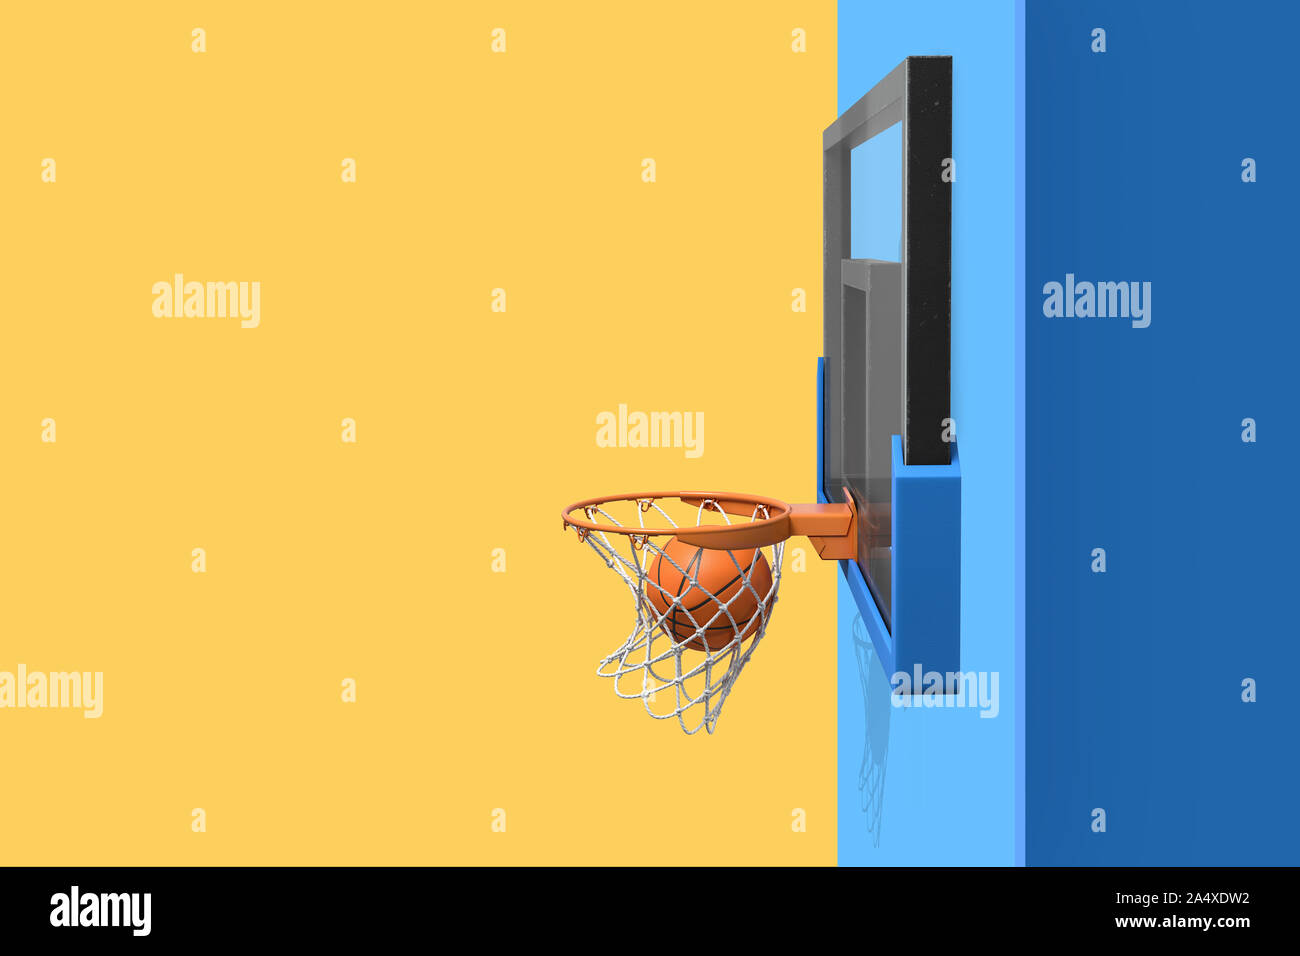 3d rendering of basketball ball falling inside of the hoop attached to the blue wall on an orange background. Stock Photo